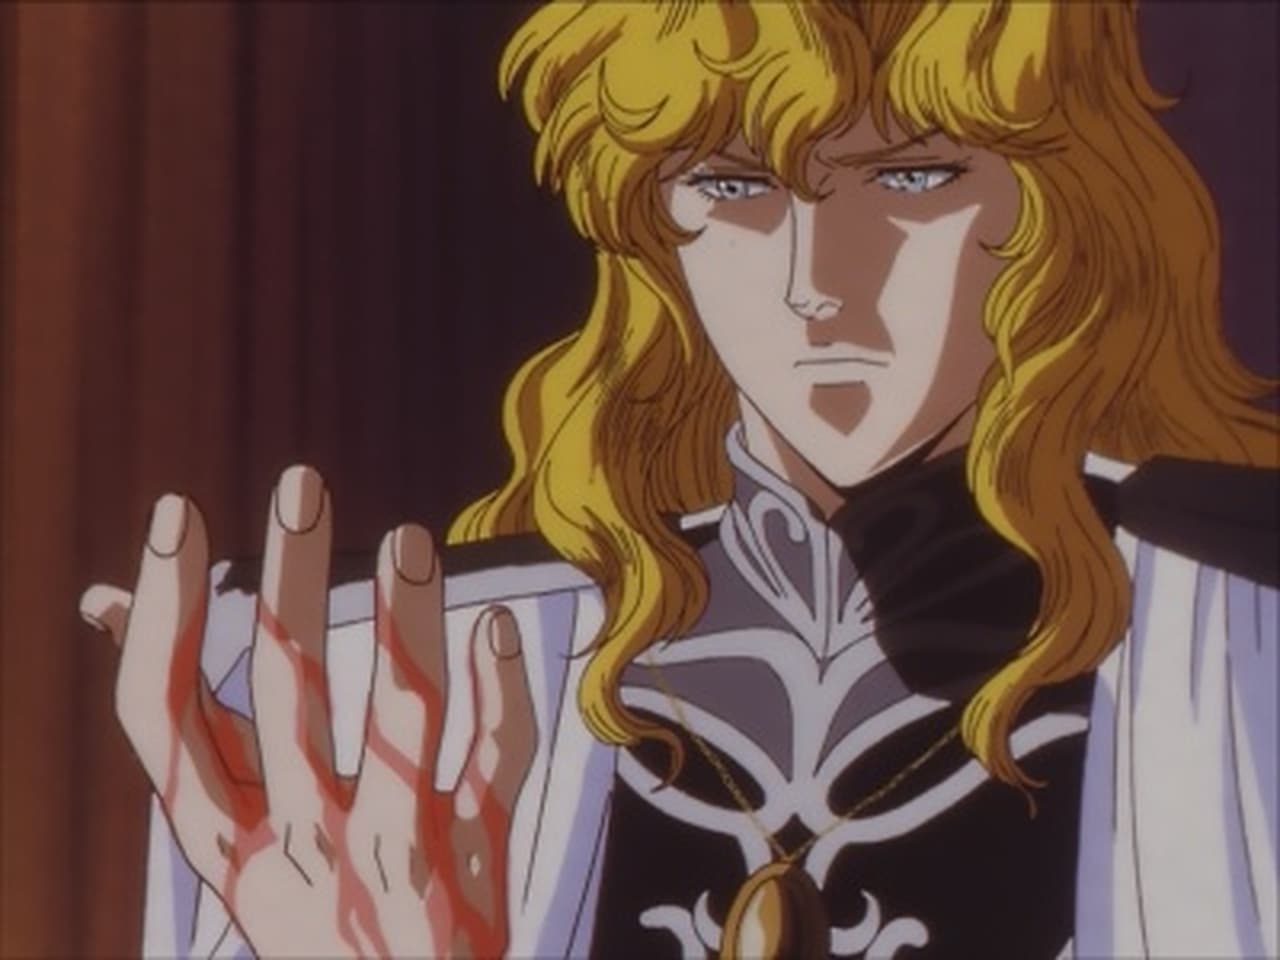 Legend of the Galactic Heroes - Season 4 Episode 3 : A Rose at Summer's End